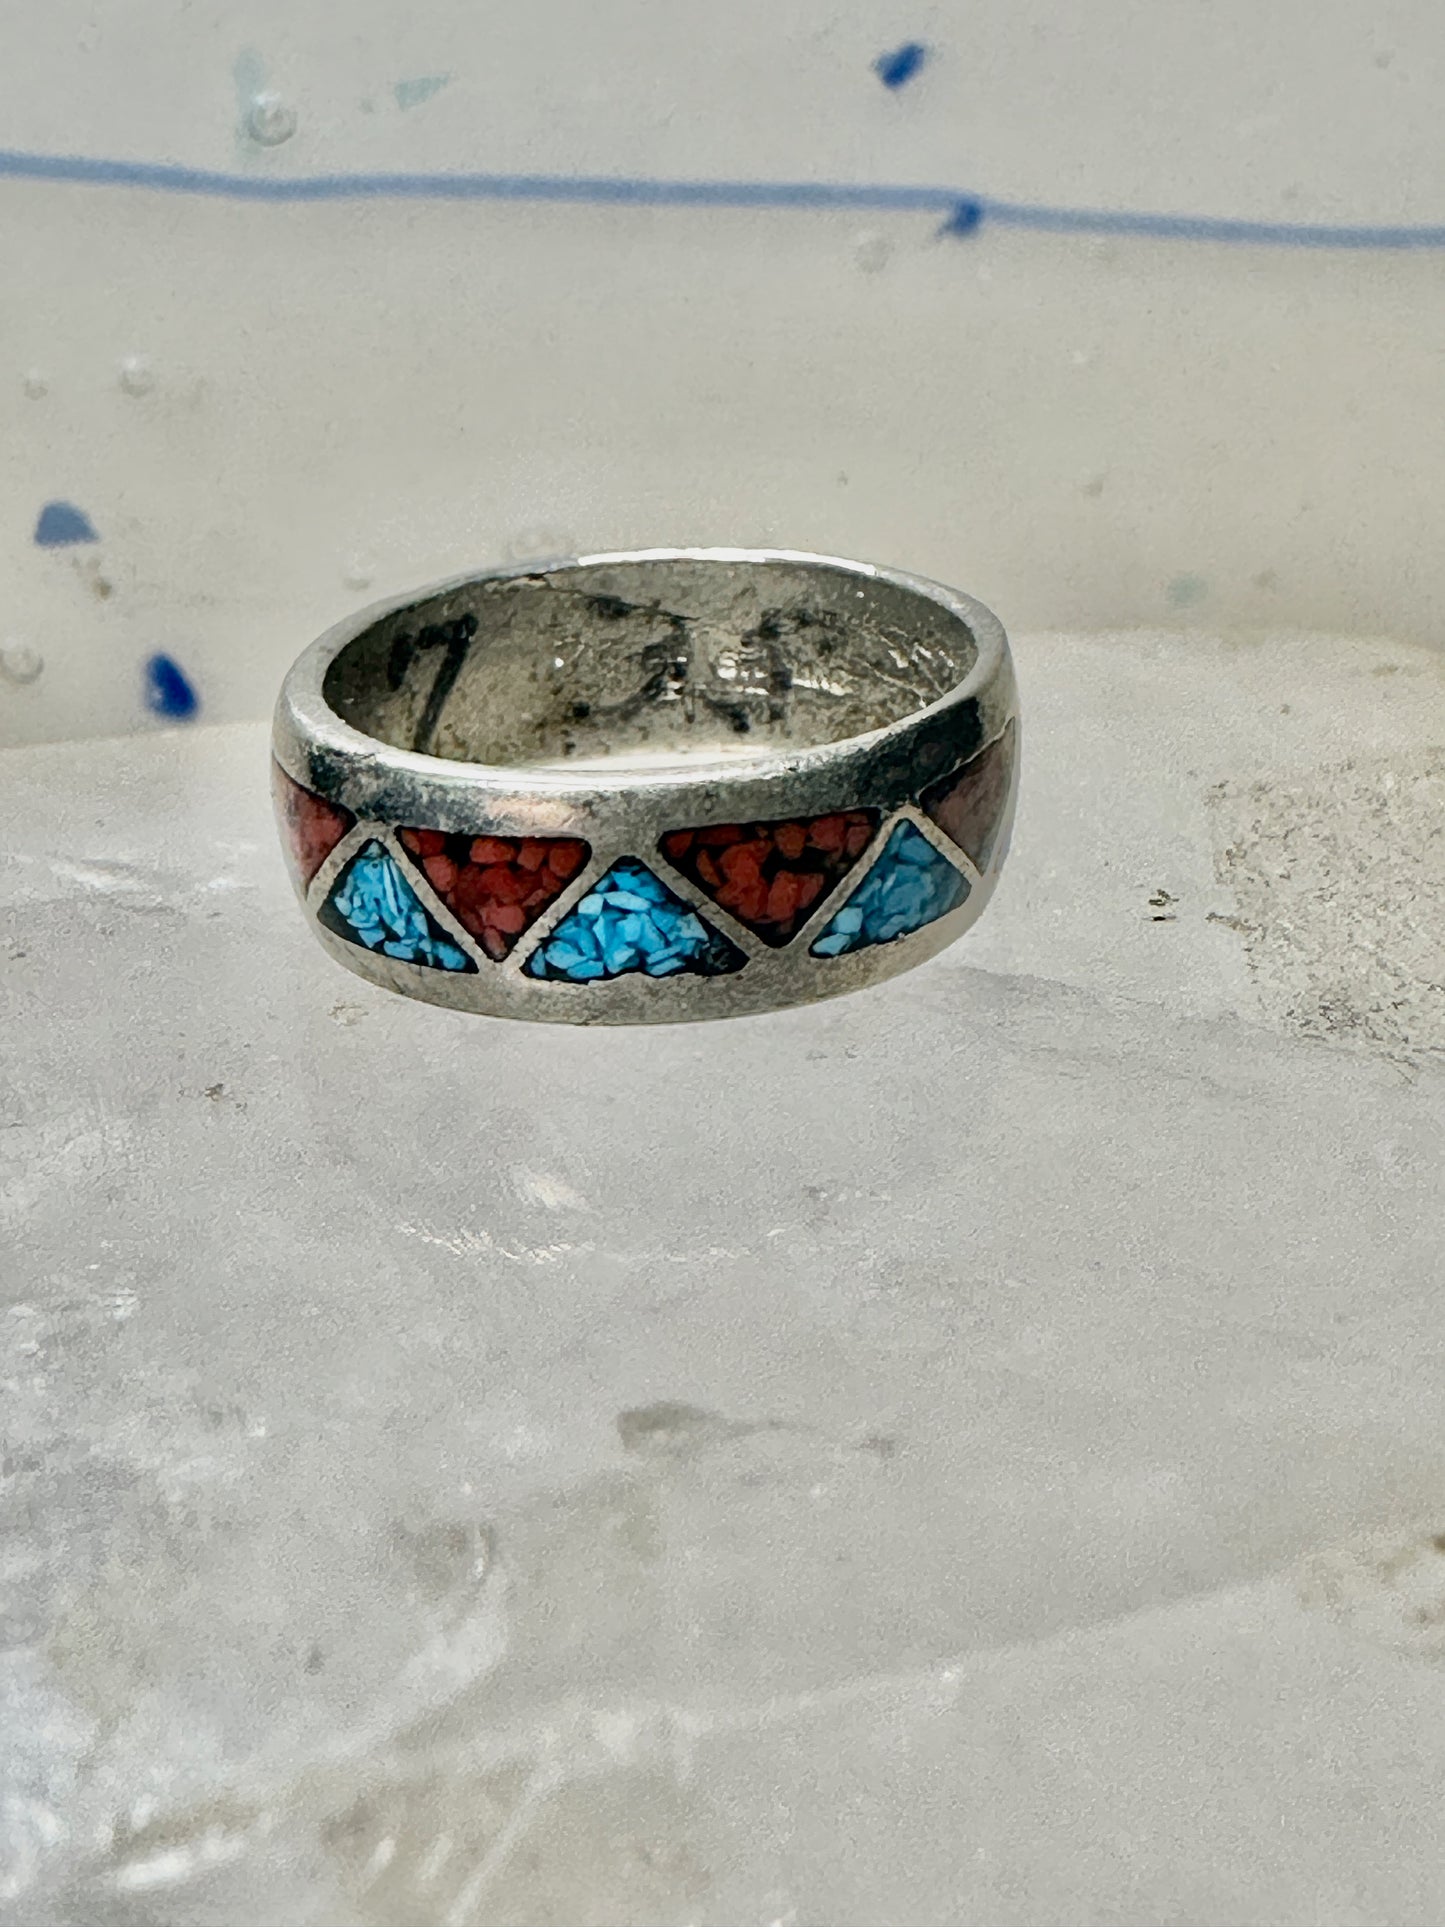 Zuni ring turquoise coral chips wedding band size 6.75 sterling silver women men